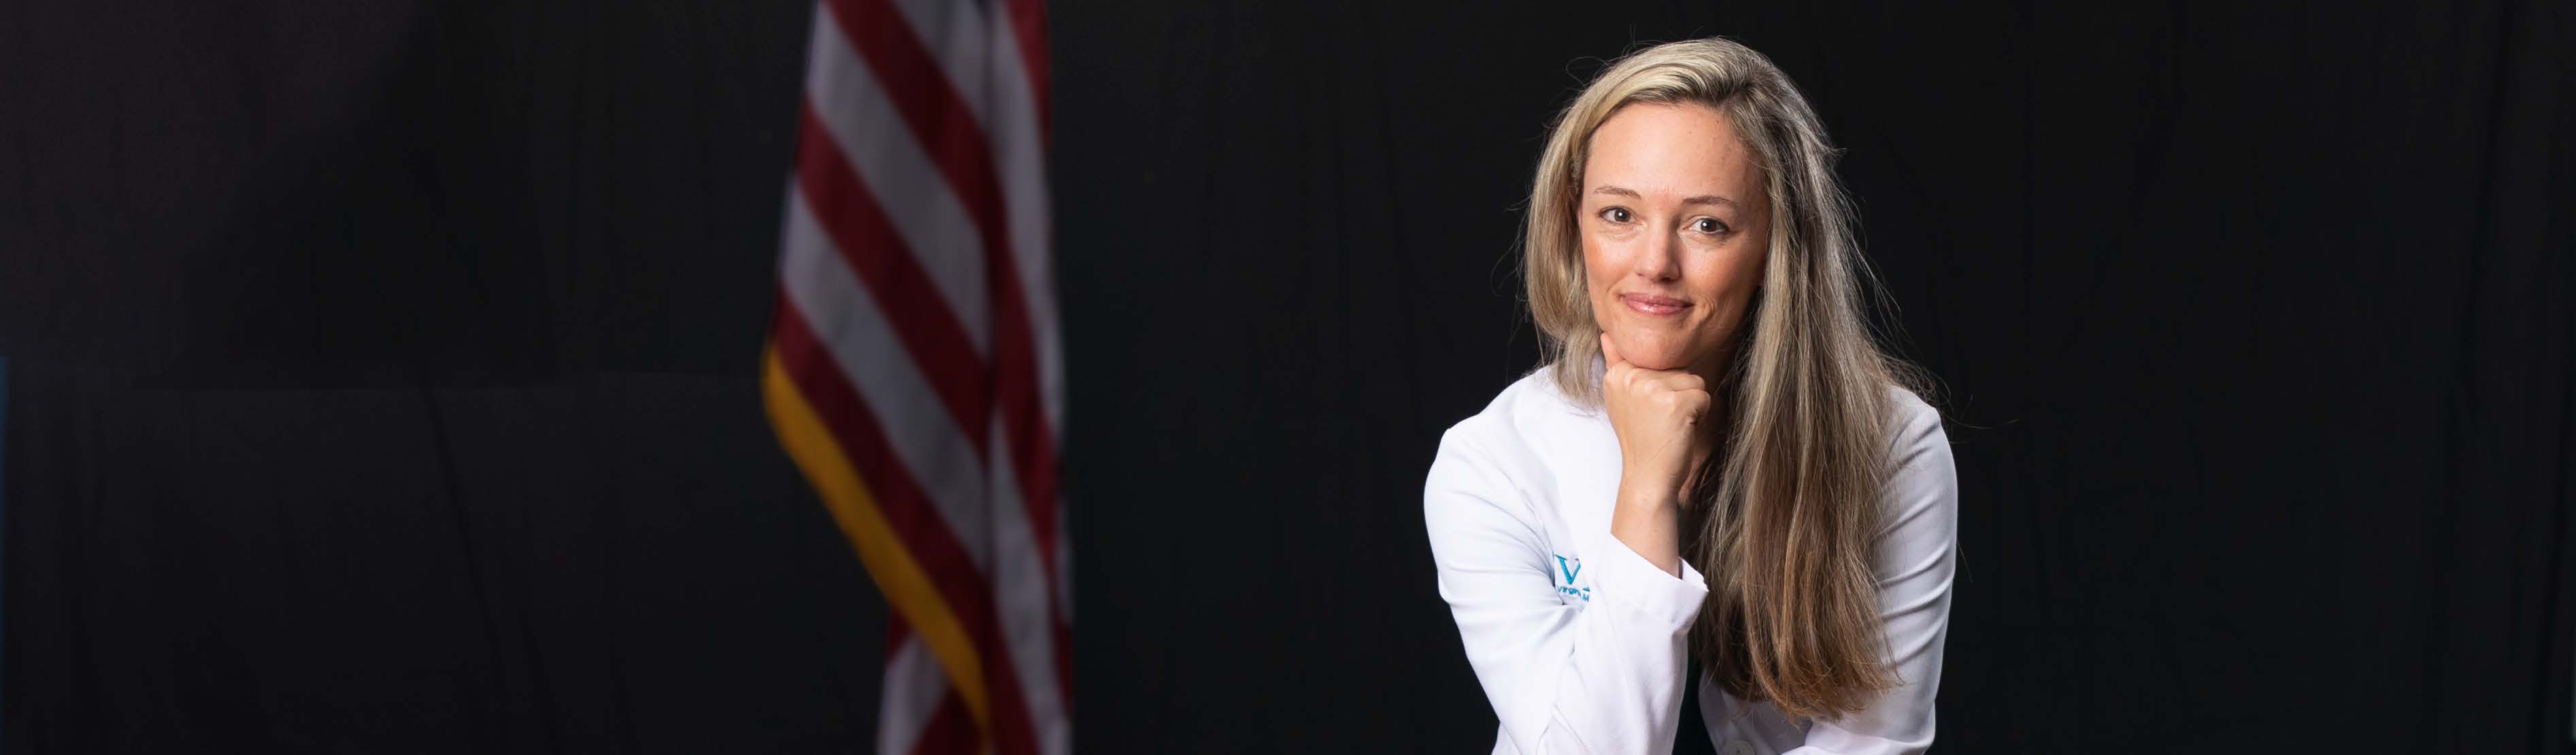 Dr. Brooke Hooper smiles at the camera and stands confidently in her white coat with the American flag out of focus behind her.